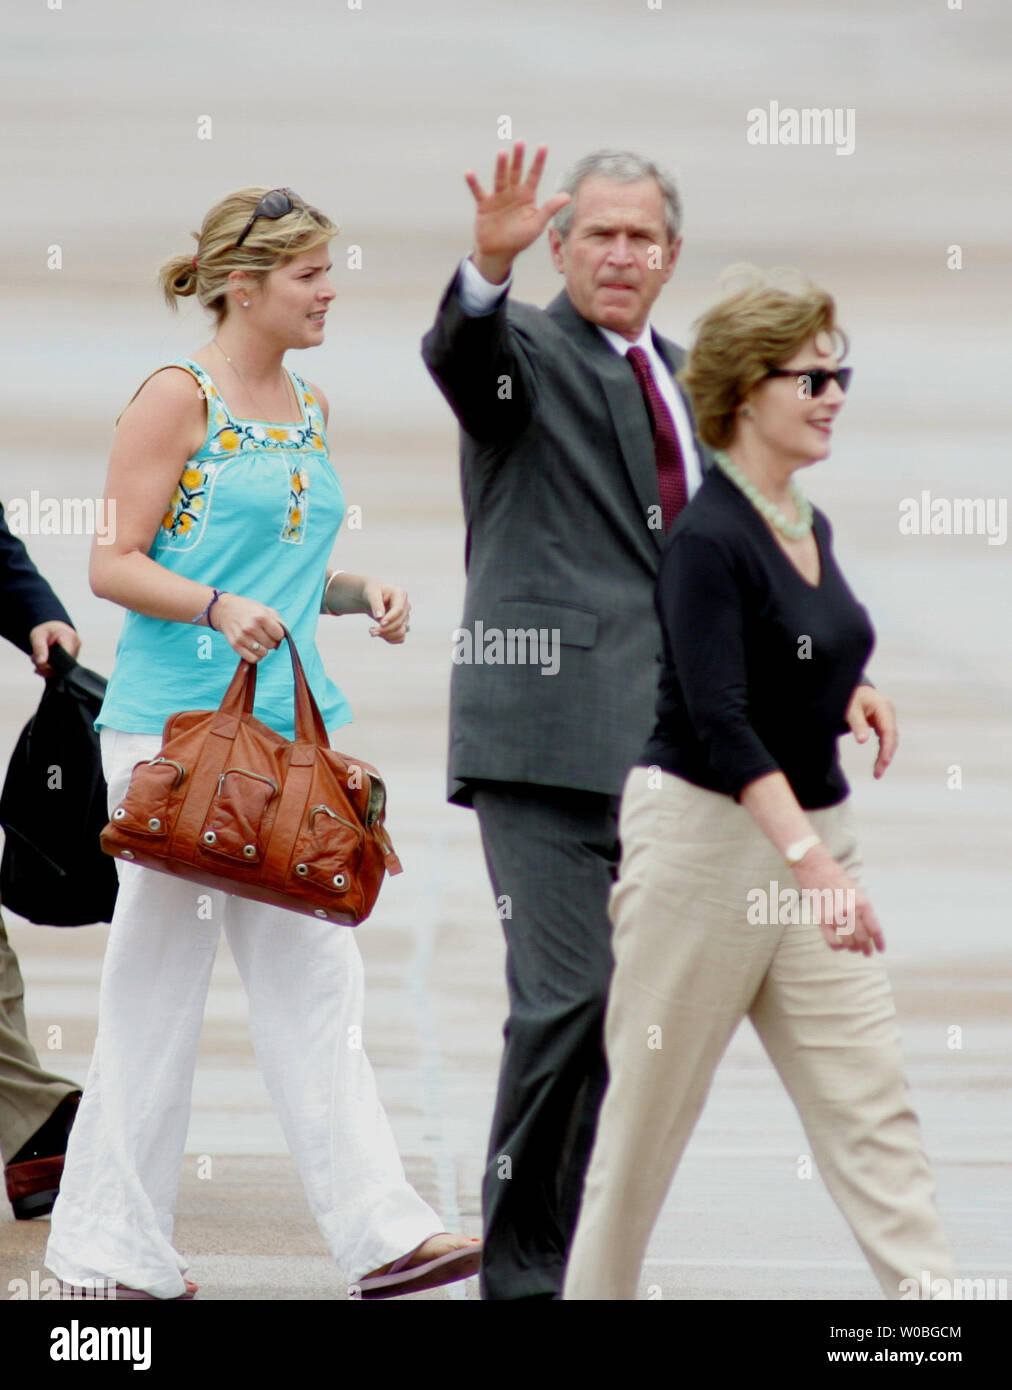 U.S. President George W. Bush, First Lady Laura Bush (R) and their daughter Jenna Bush (L) arrive at TSTC airport in Waco, Texas on June 17, 2007. The Bush family spent the Fathers Day weekend at his ranch in Crawford, Texas and will travel back to Washington. (UPI Photo/Ron Russek II) Stock Photo